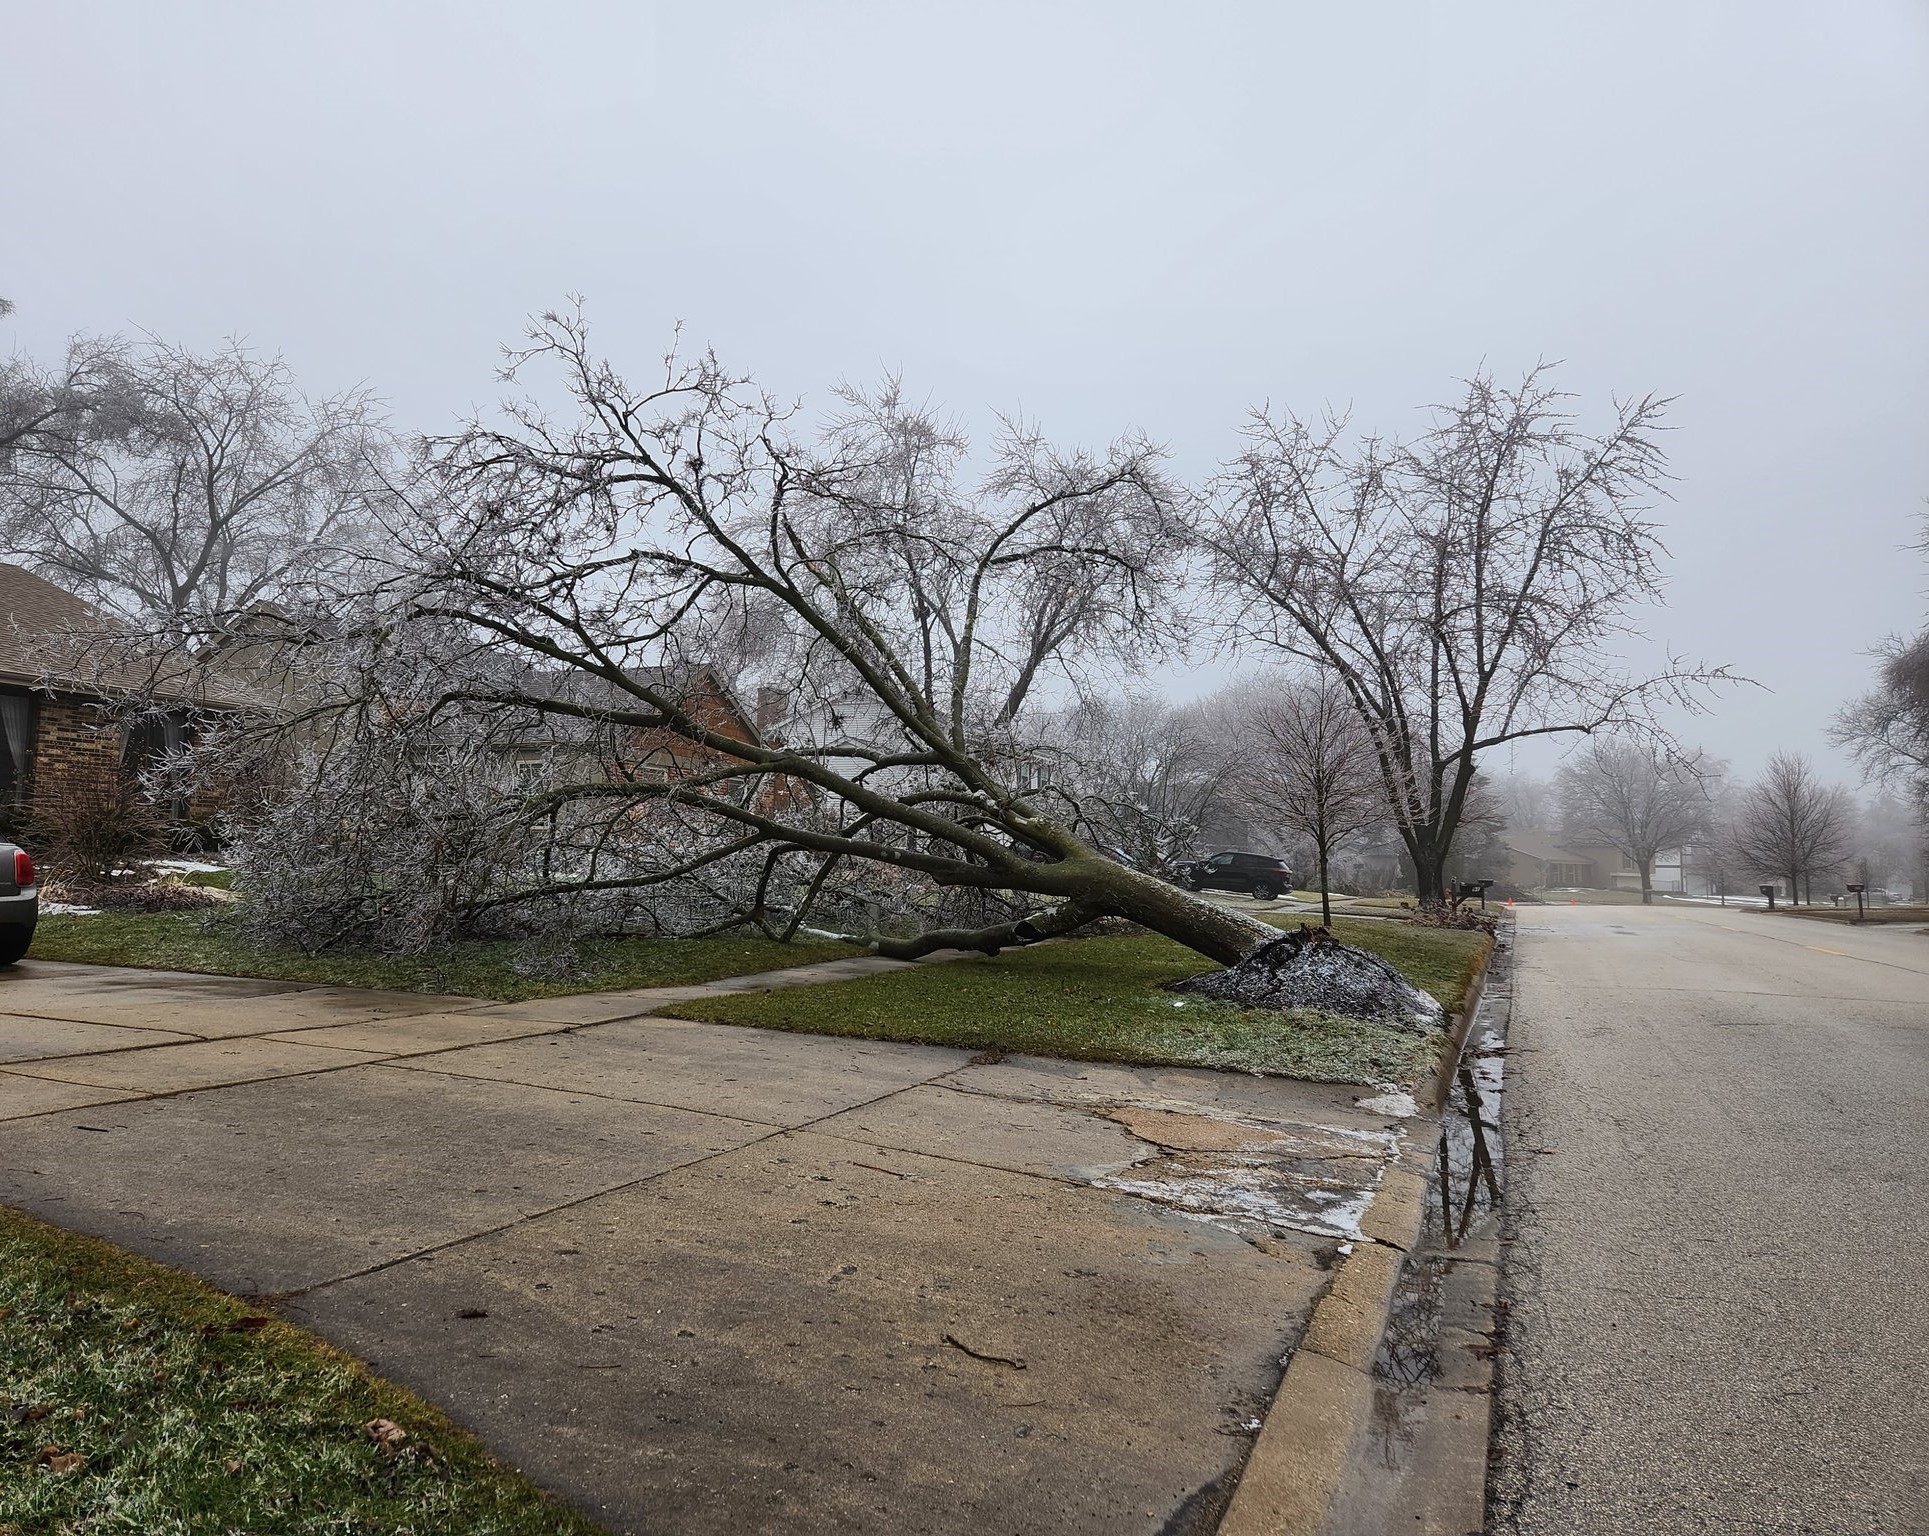 Photo showing damage caused by freezing rain in Crystal Lake, IL